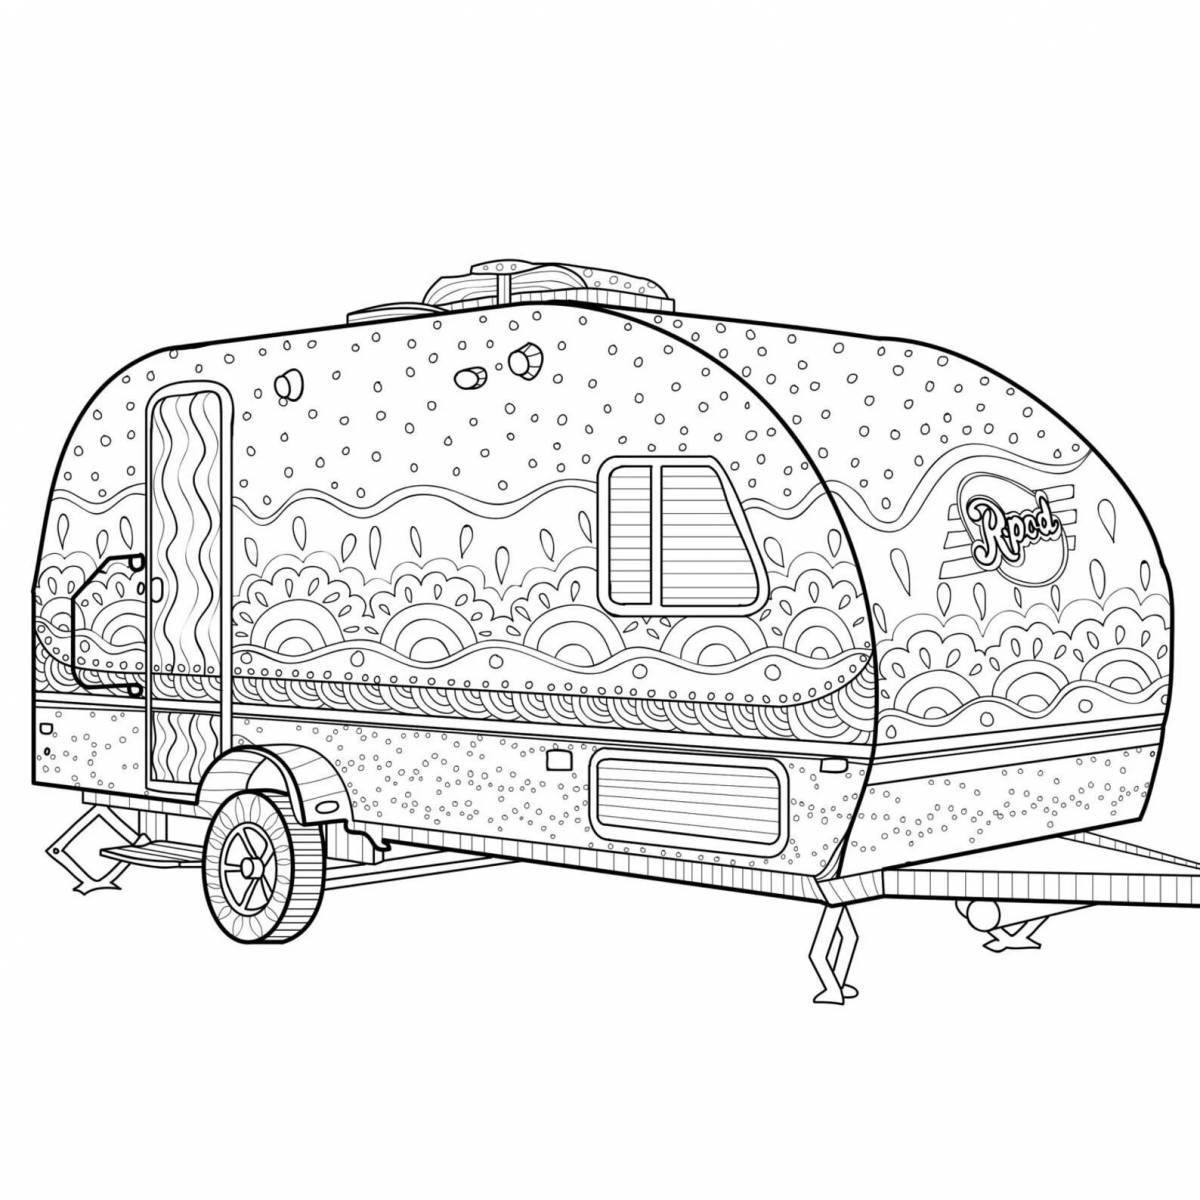 Great motorhome coloring page